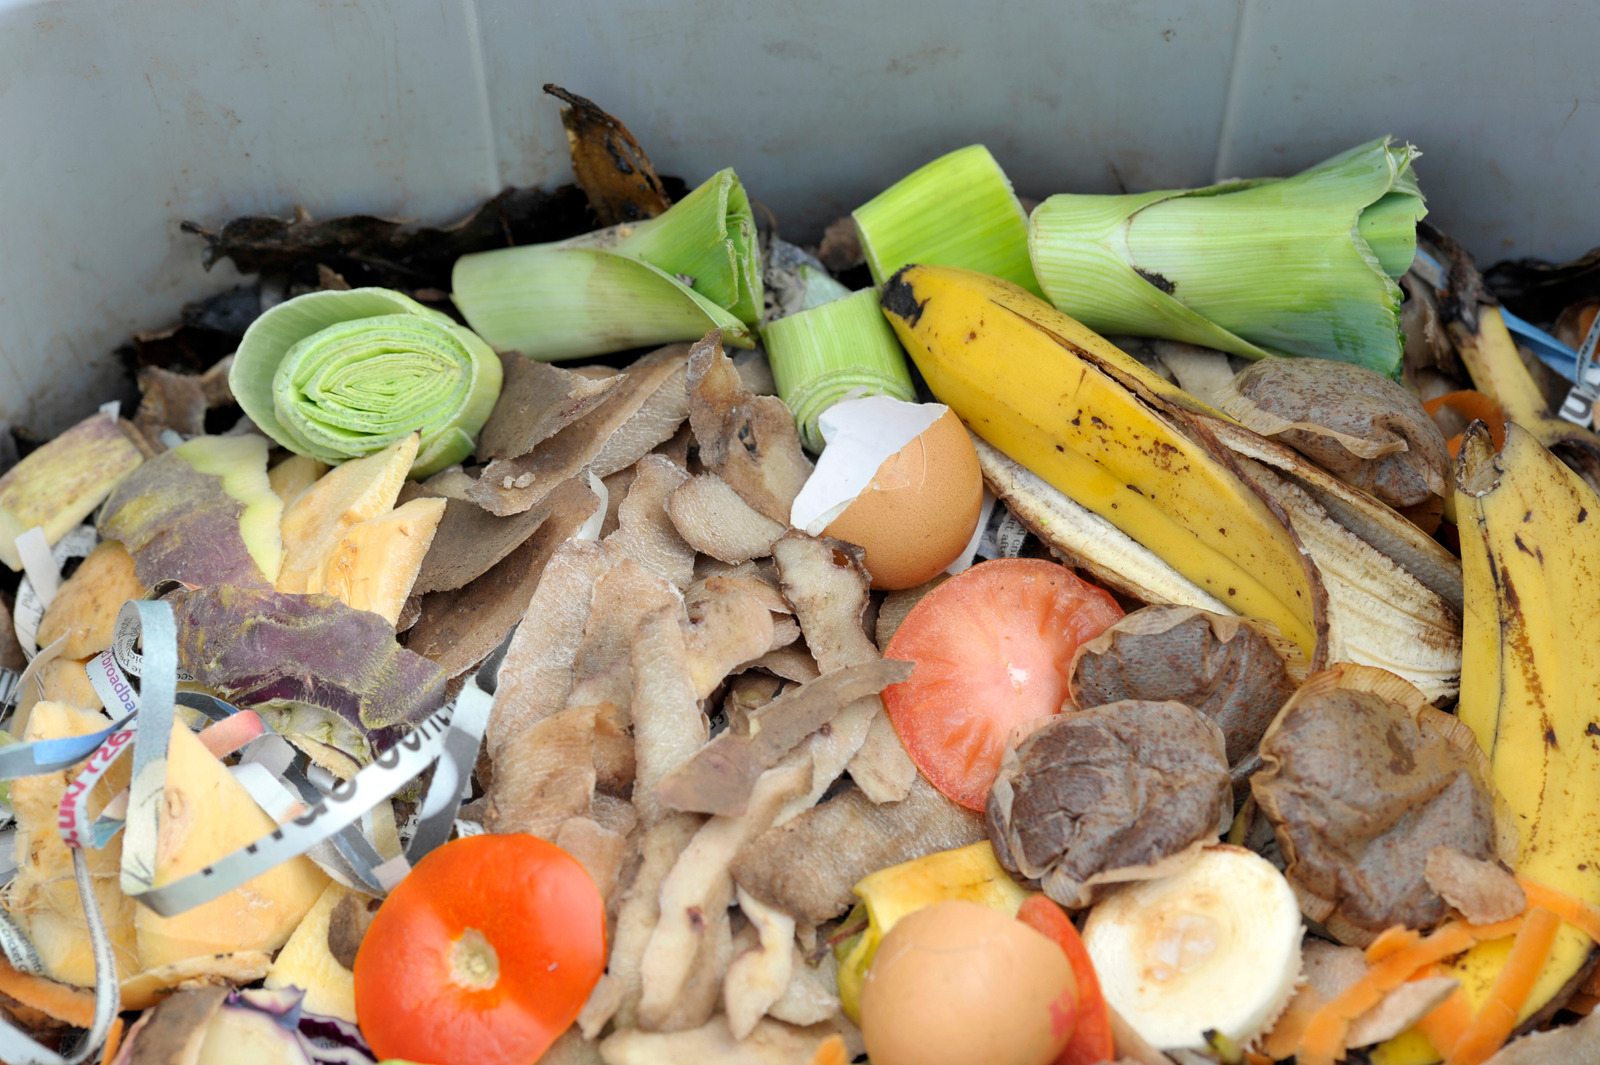 Inside a worm bin, wormery or worm farm with vegetable, fruit, general kitchen food waste including used tea bags, egg shells and shredded newspaper.